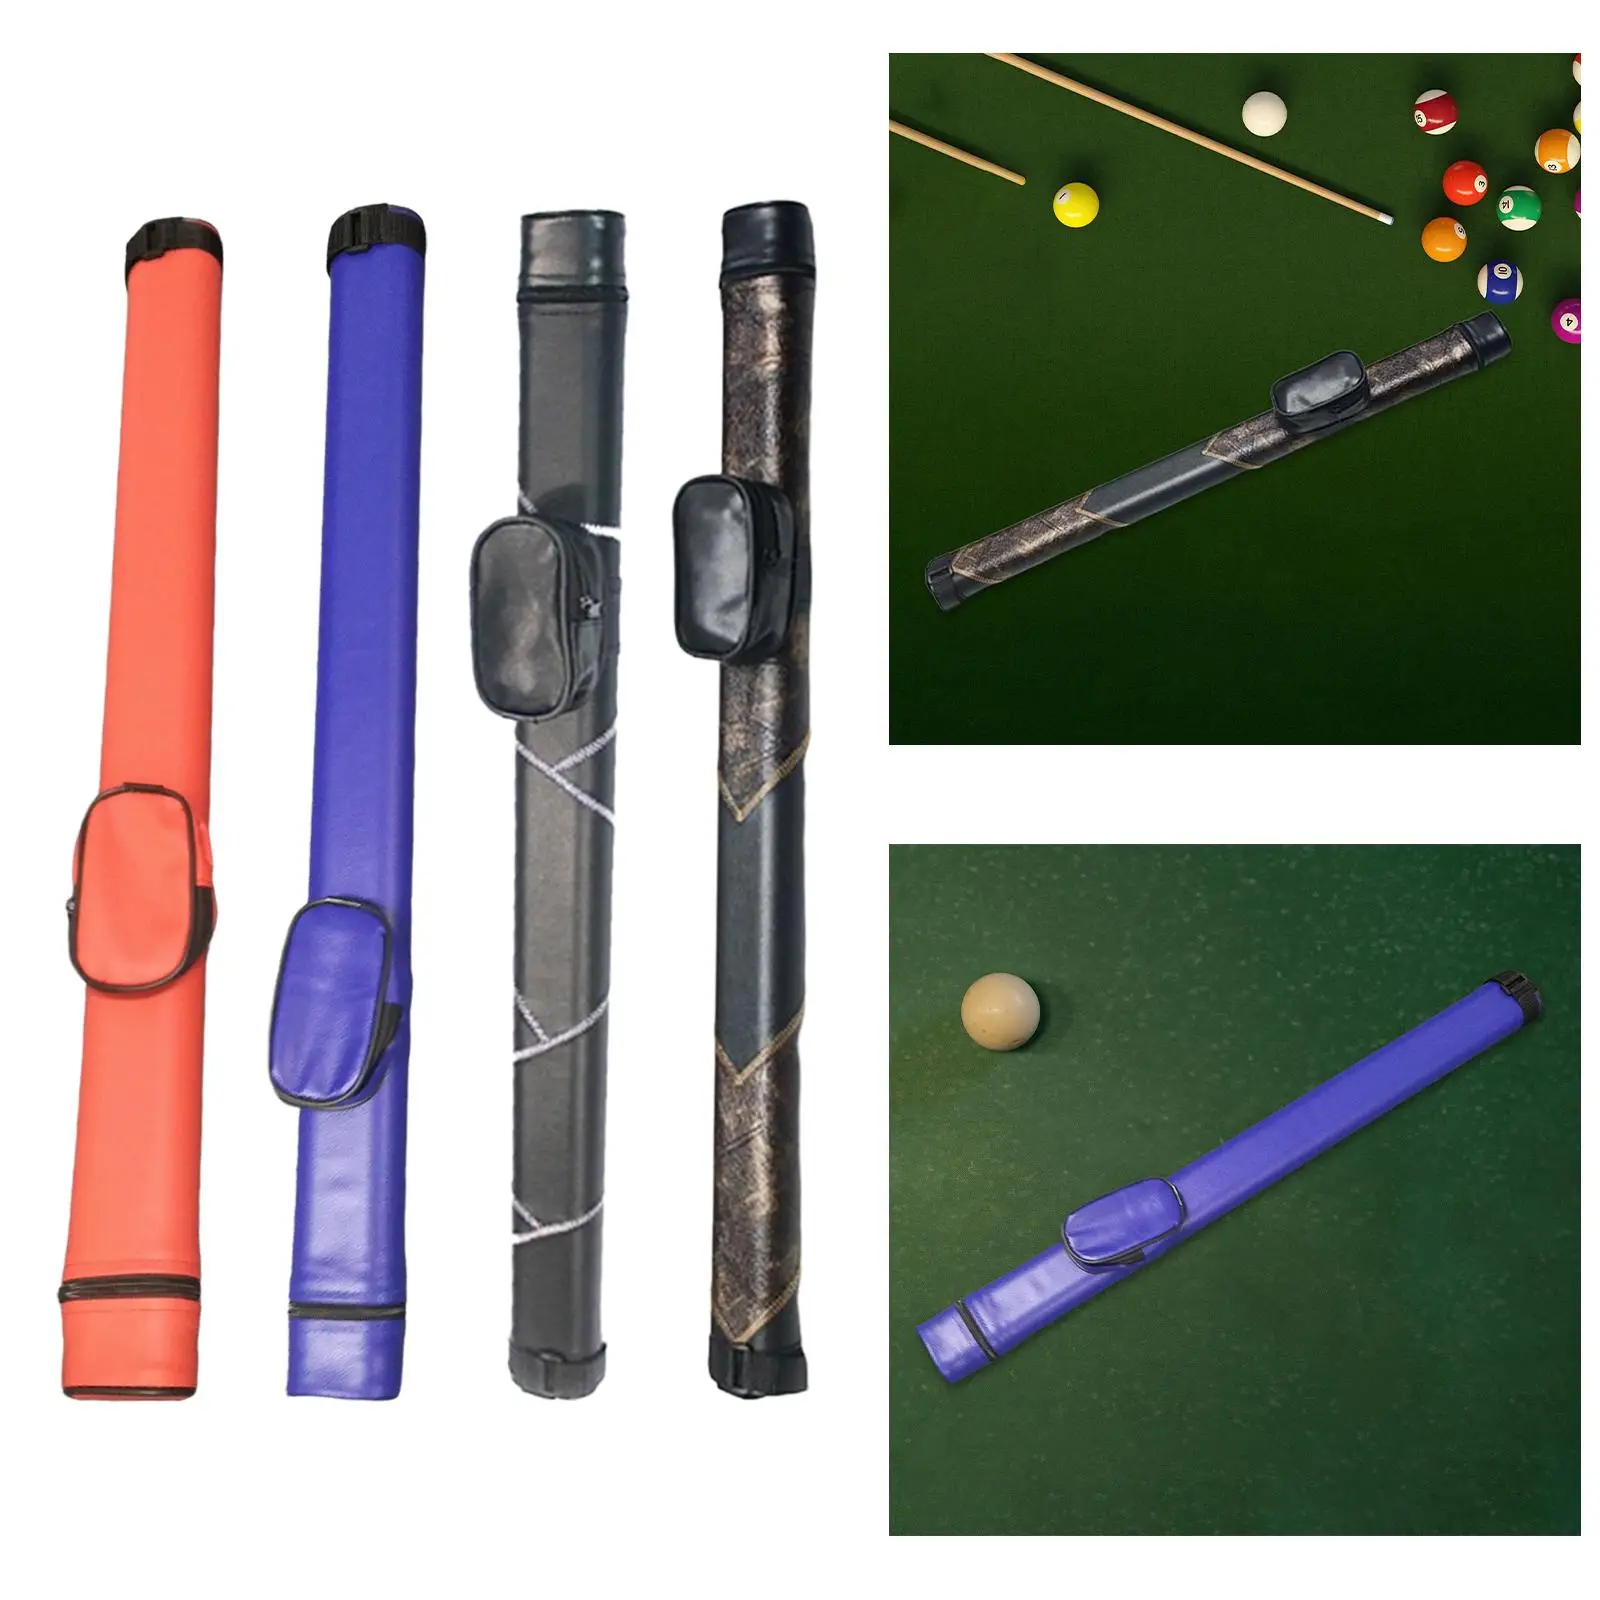 Billiards Pool Cue Case Scratch Resistant Portable Holder PU Leather Pouch Professional Hard Pool 1/2 Cue Case Snooker Cue Case